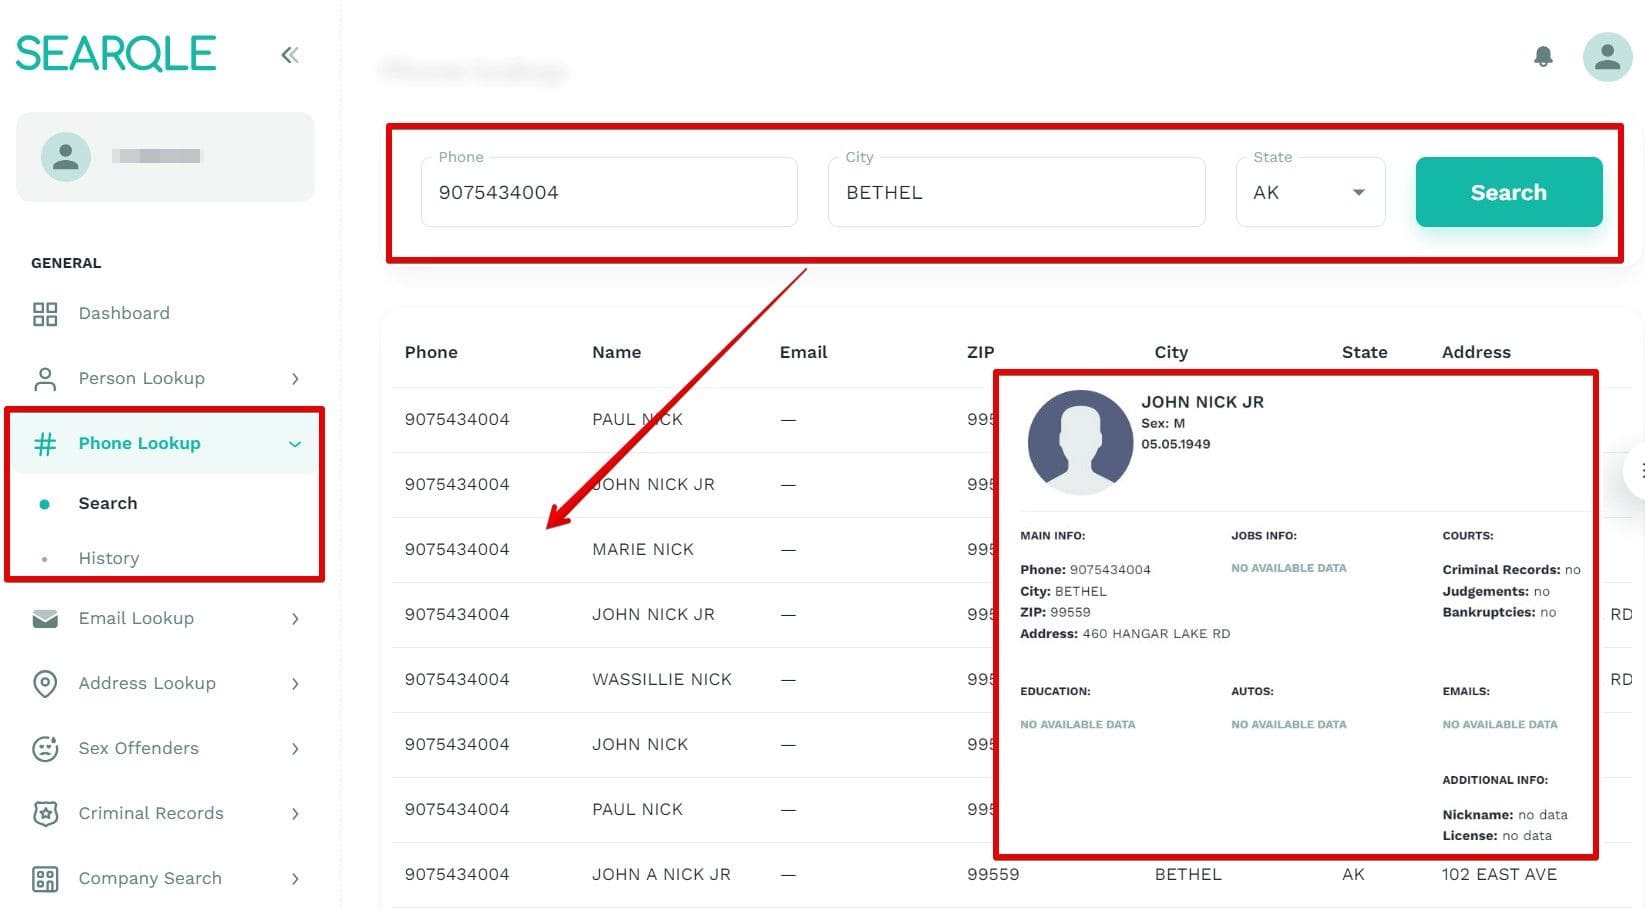 Image showing how to find a person by phone number on Searqle and what data will be visible in a search